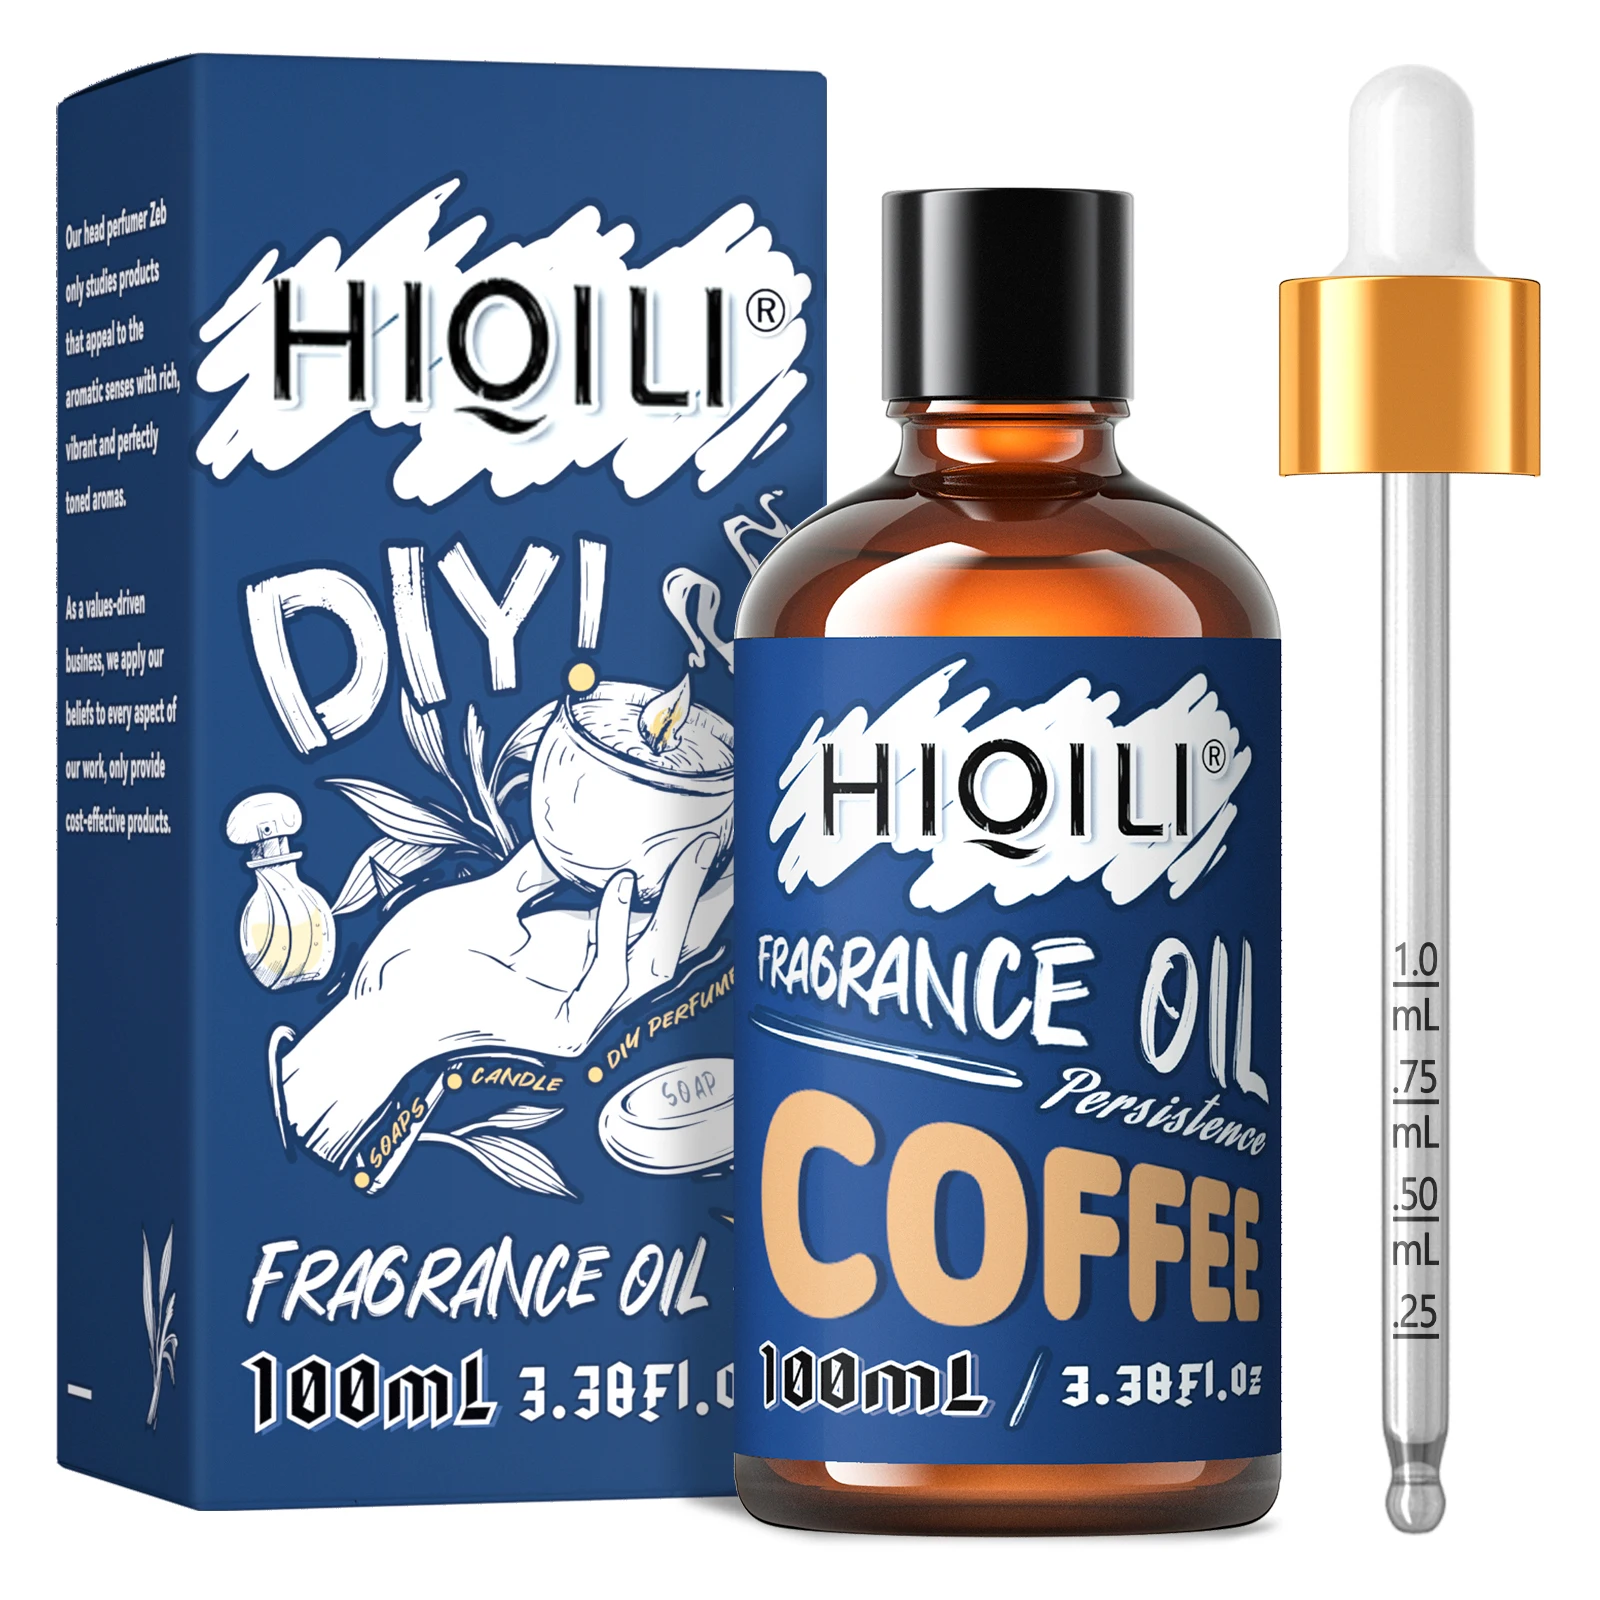 Coffee Fragrance Oils, HIQILI 100ML 100% Pure Oil For Aromatherapy,Car Diffuser,Humidifier,Room Spray,Candle Making,Gift,DIY homedics total comfort uv c ultrasonic room humidifier 97 gallon humidifier diffuser air humidifier